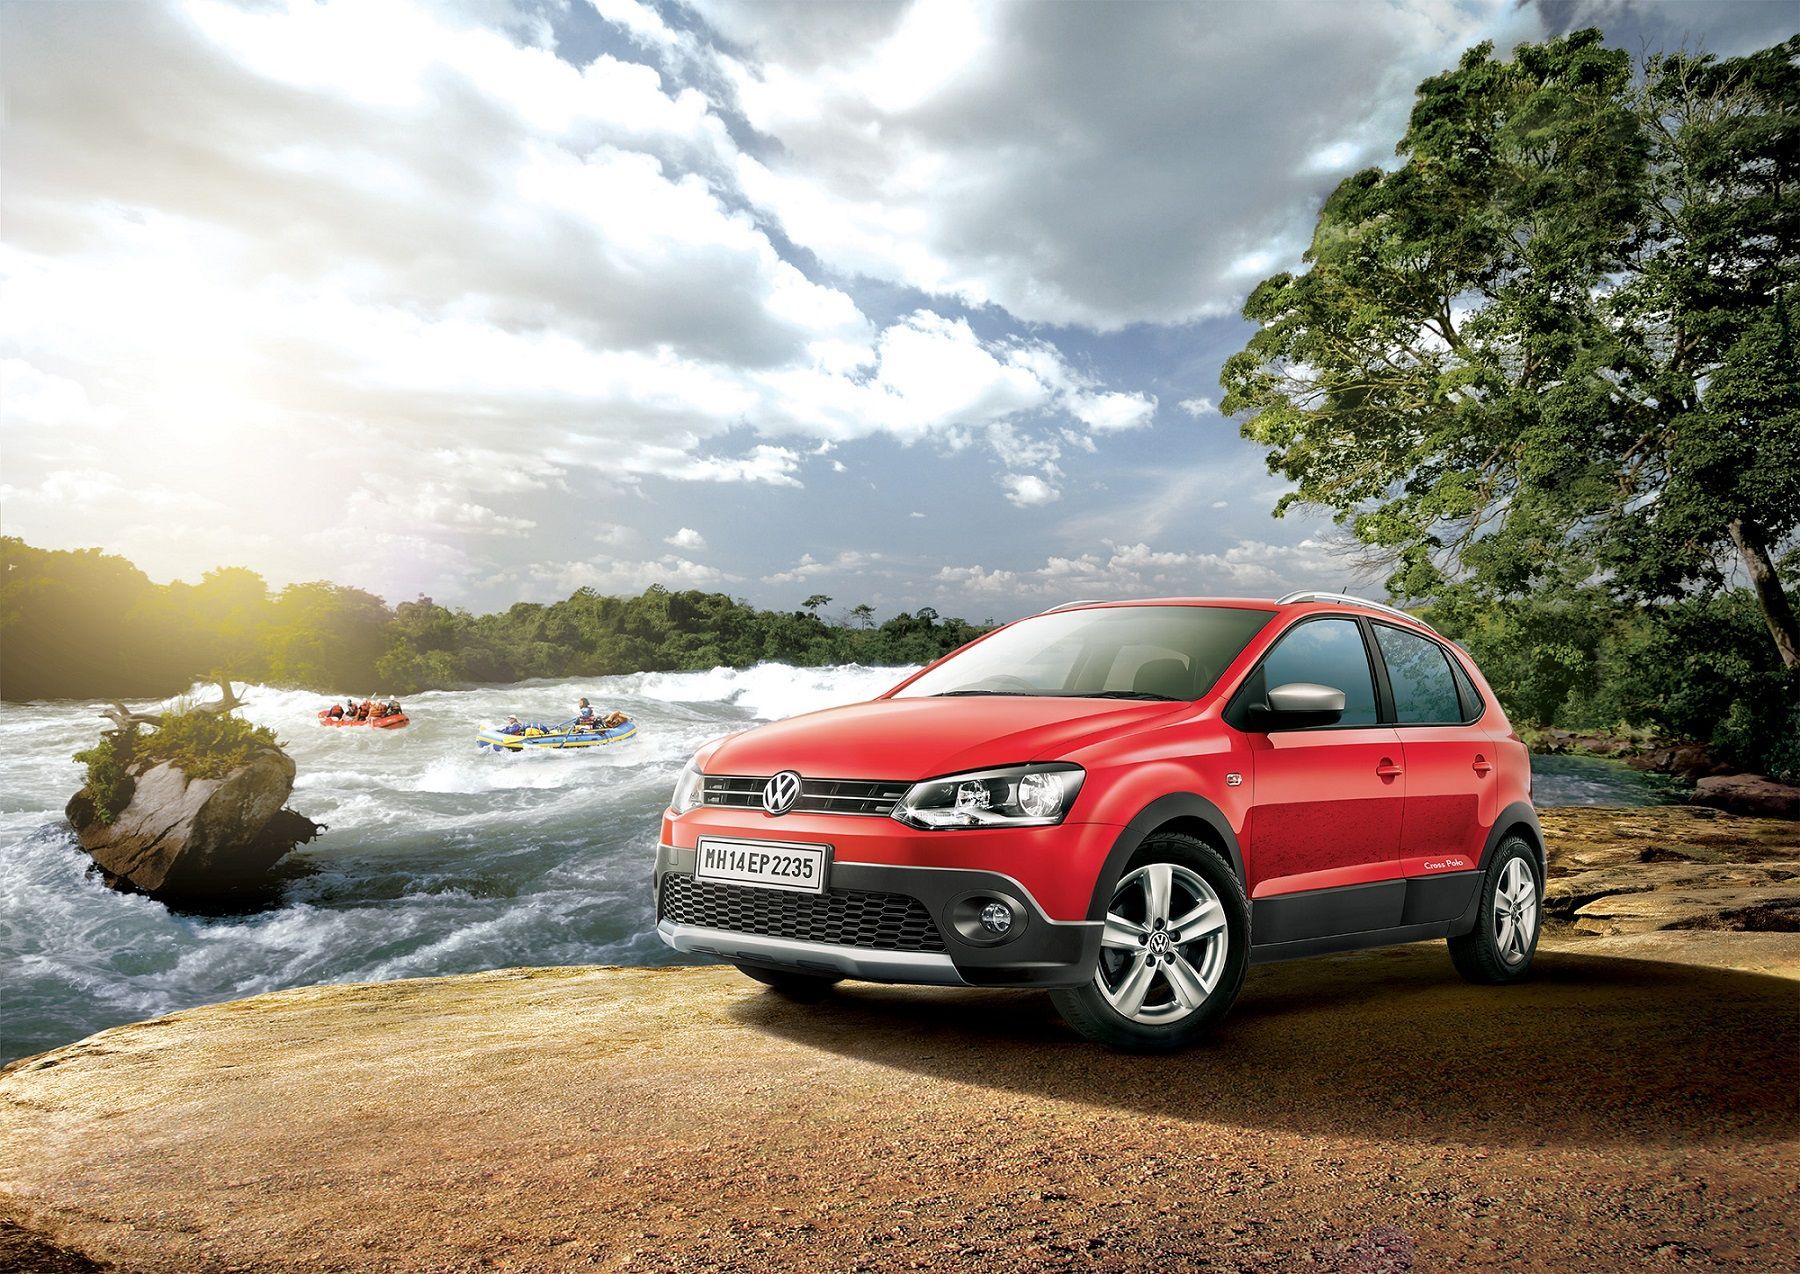 Volkswagen India launches Cross Polo 1.2 MPI at INR 6.94 lacs